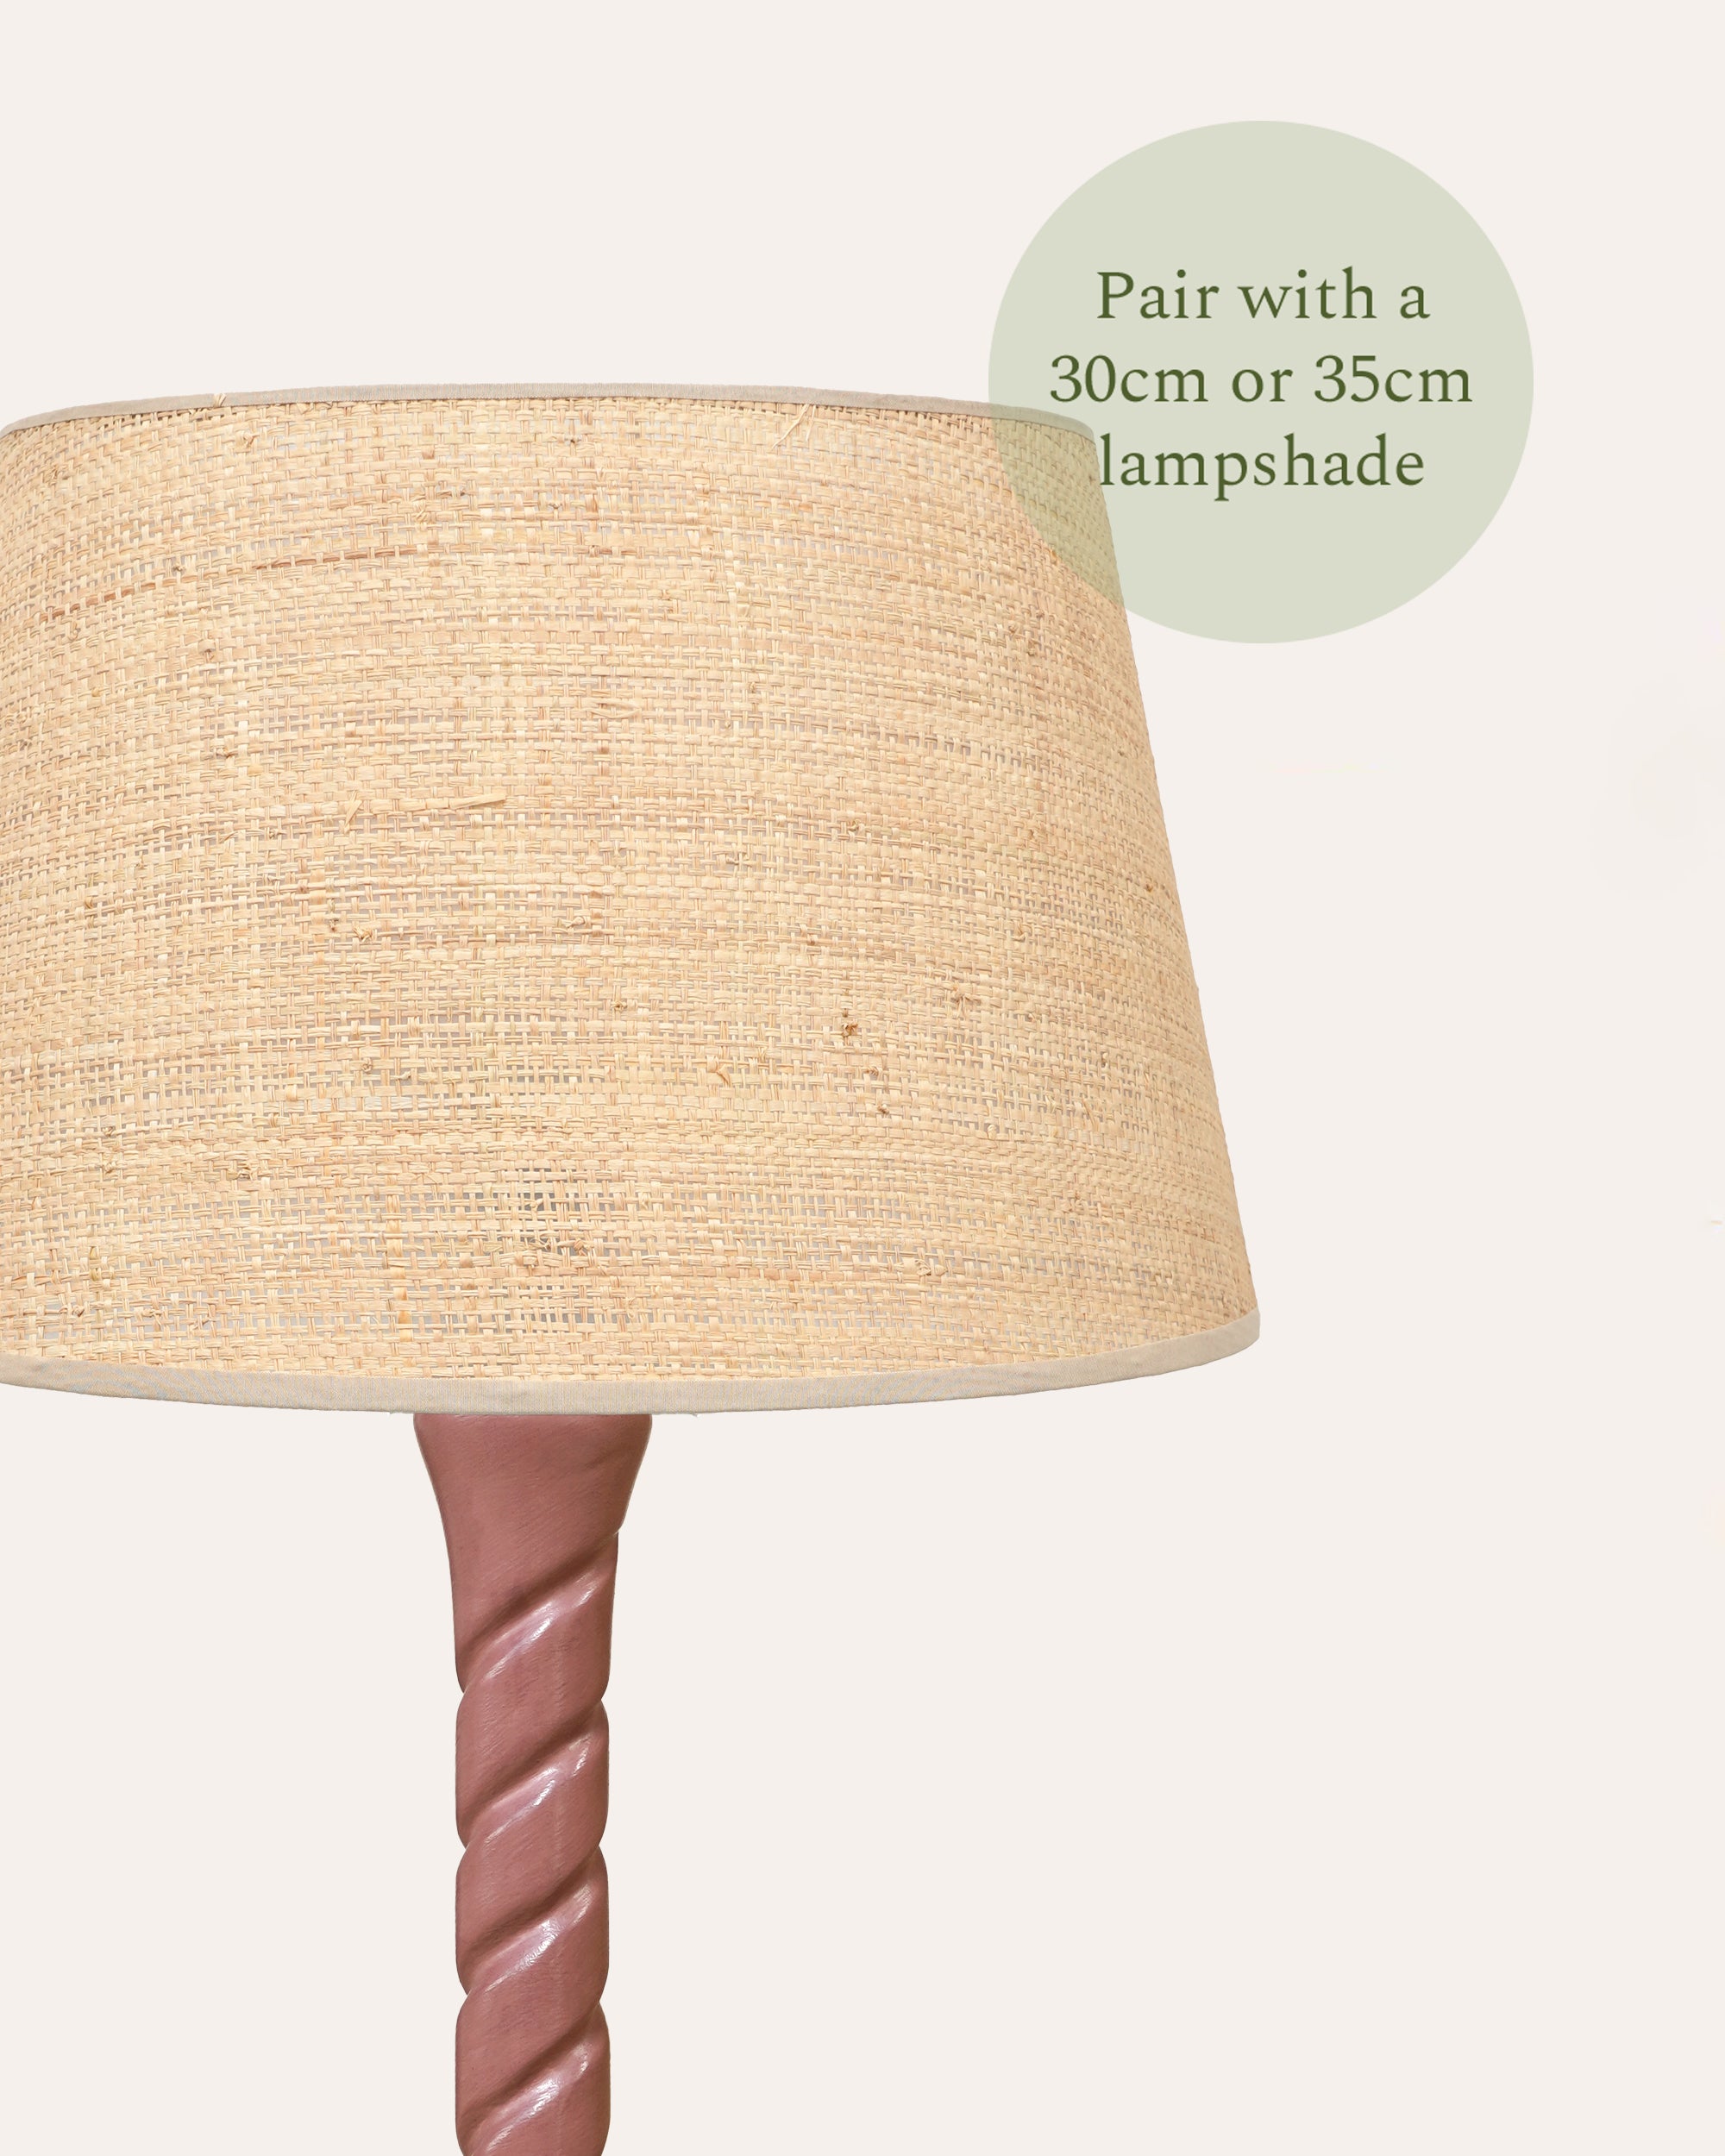 Small Twisted Wooden Table Lamp - Pink